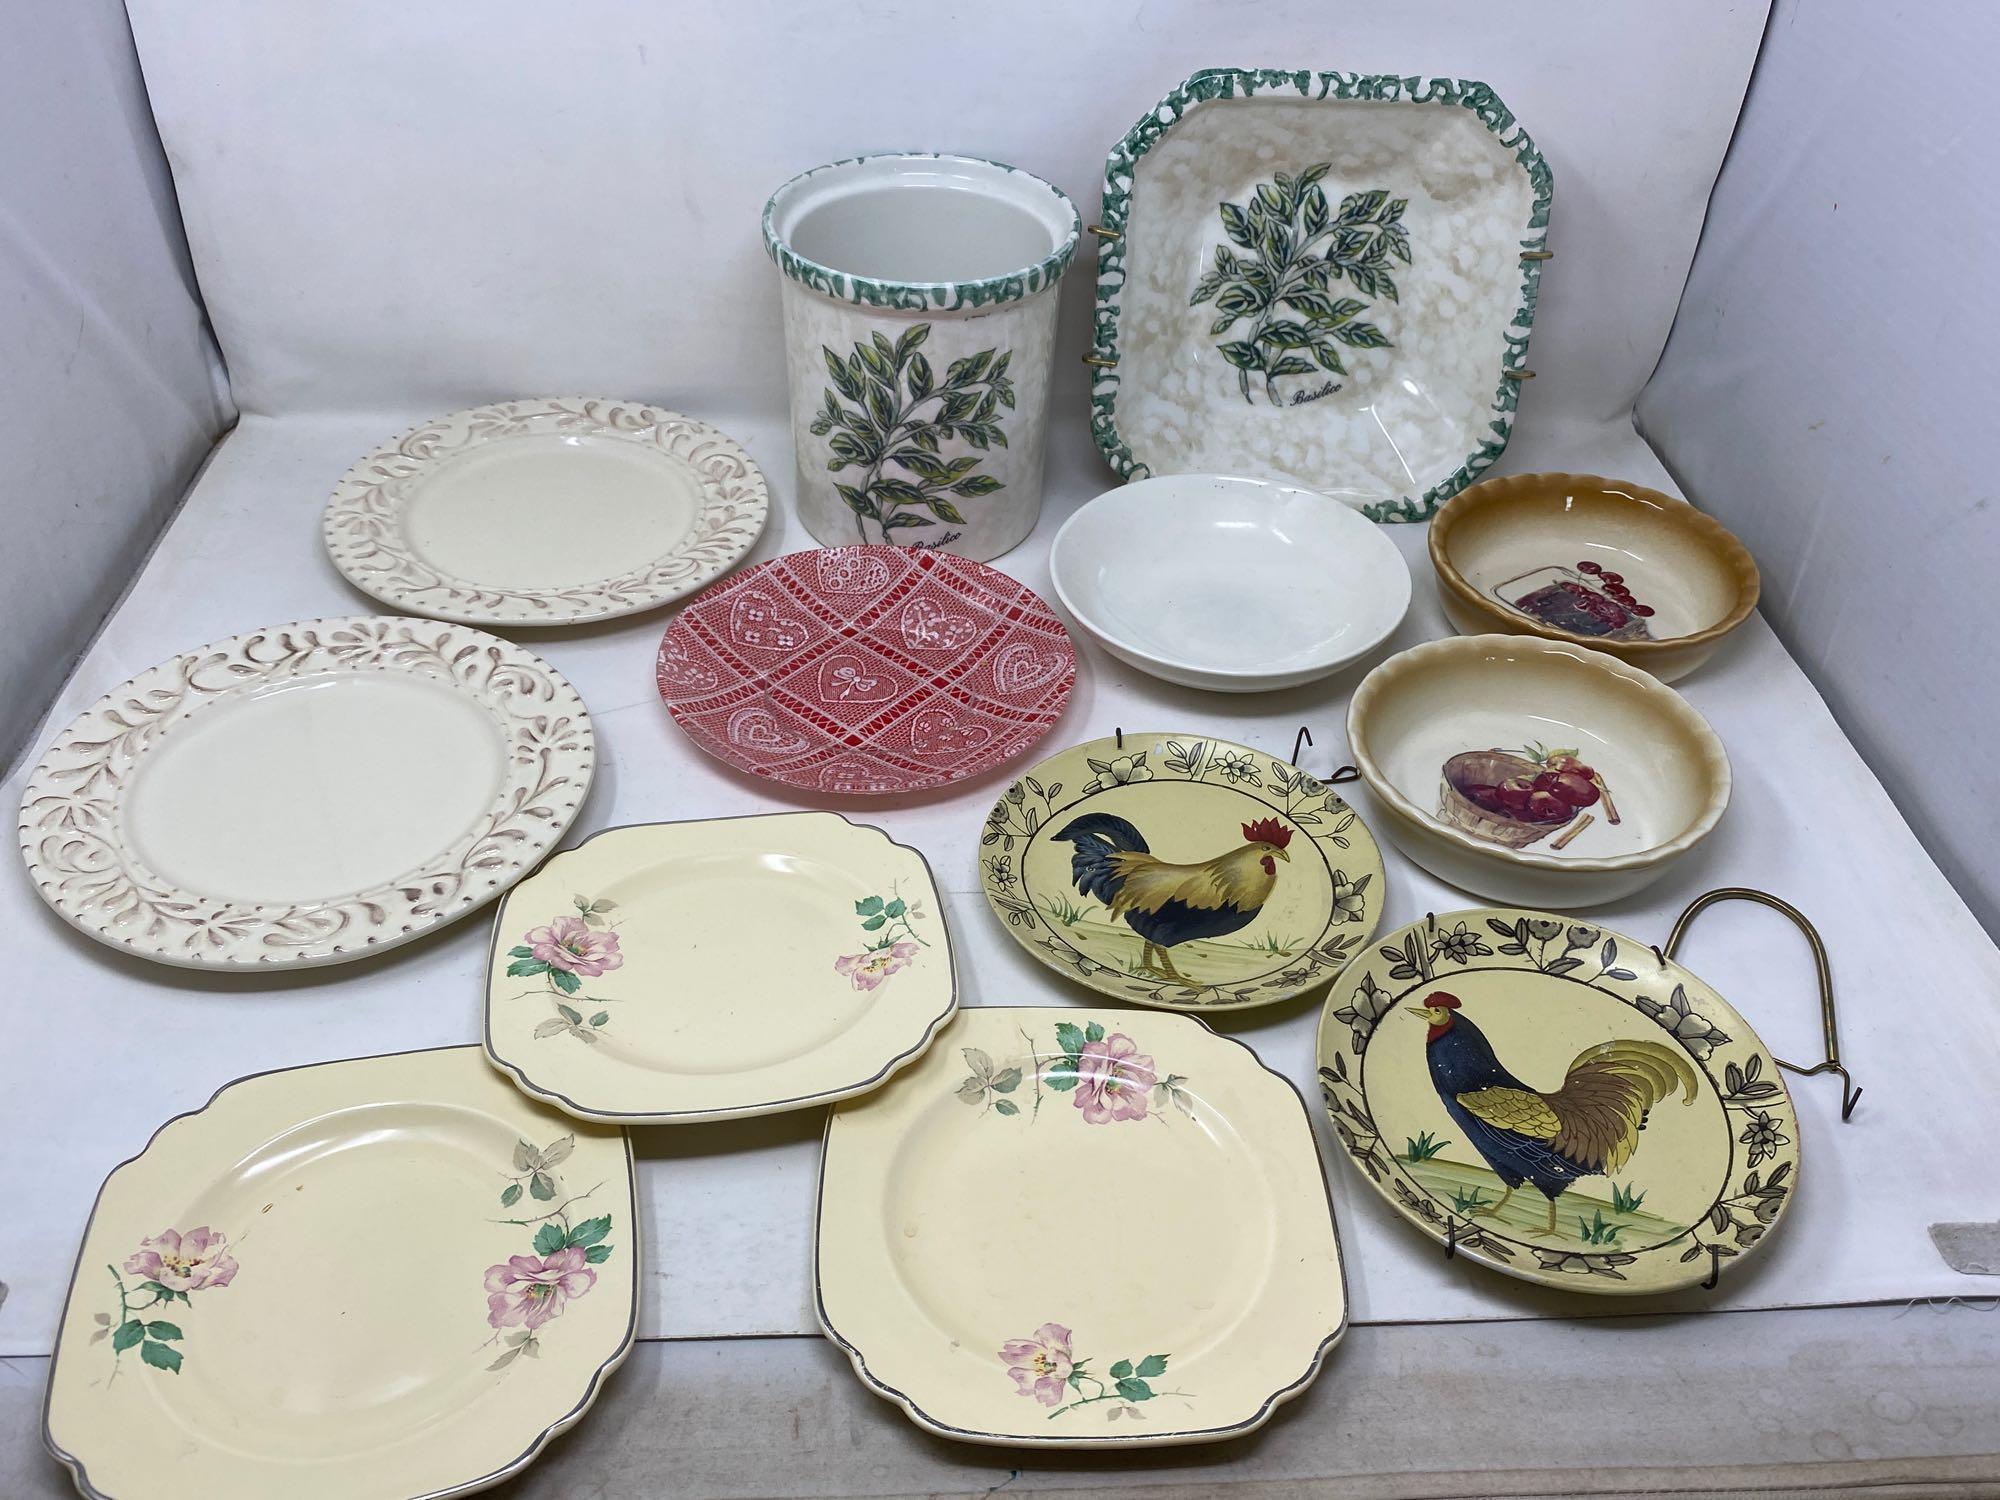 Assorted Decorated China Plates, Bowls, Jar